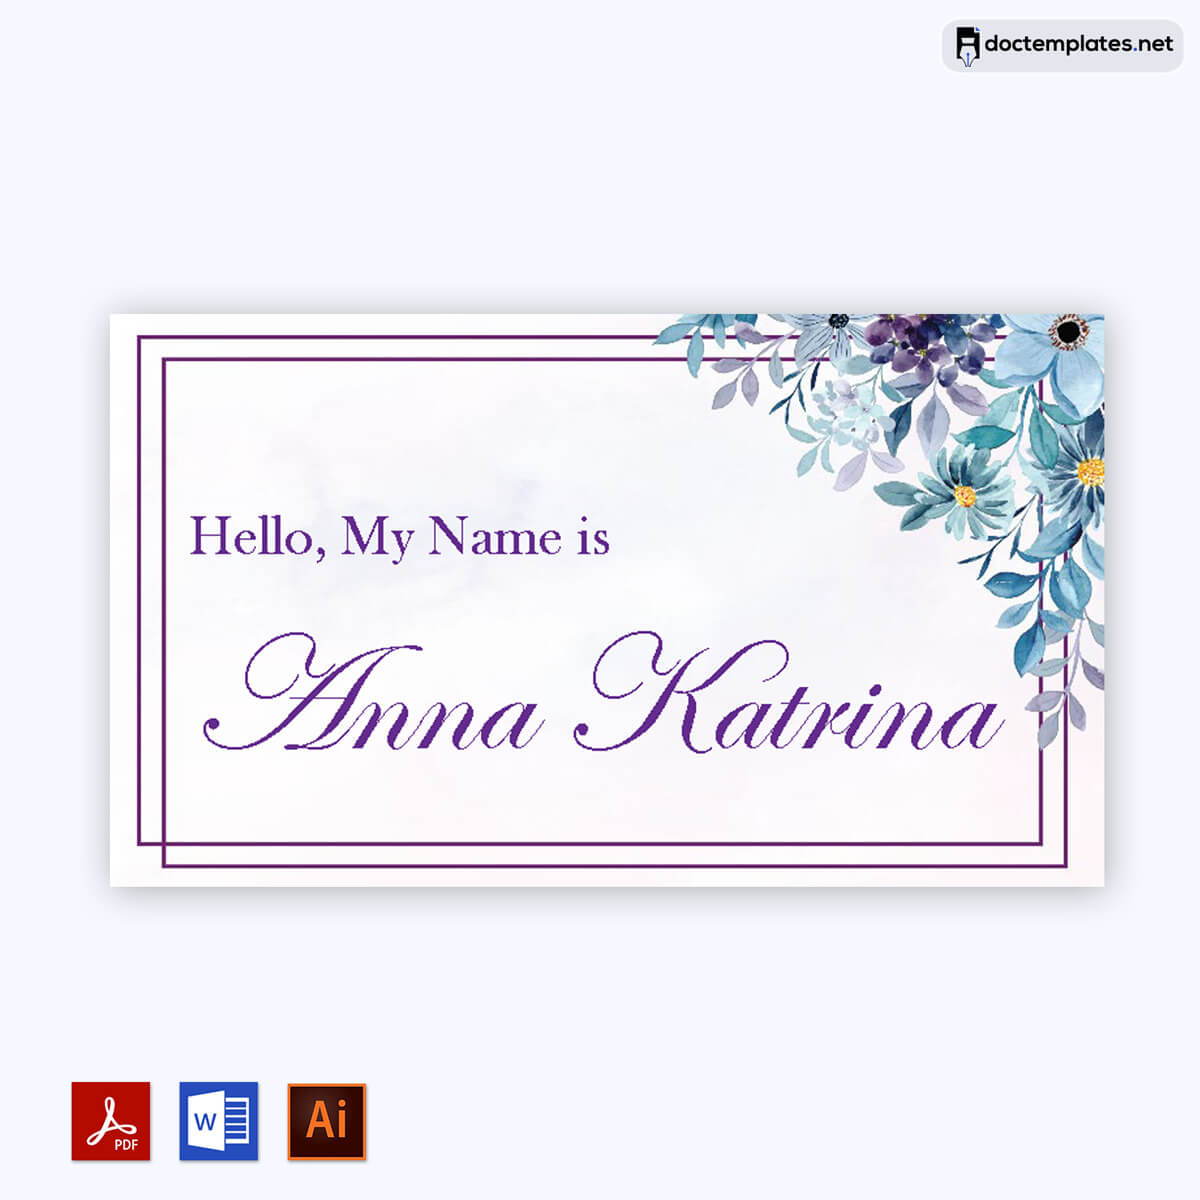 Image of Desk name tag Template Word
Desk name tag Template Word
